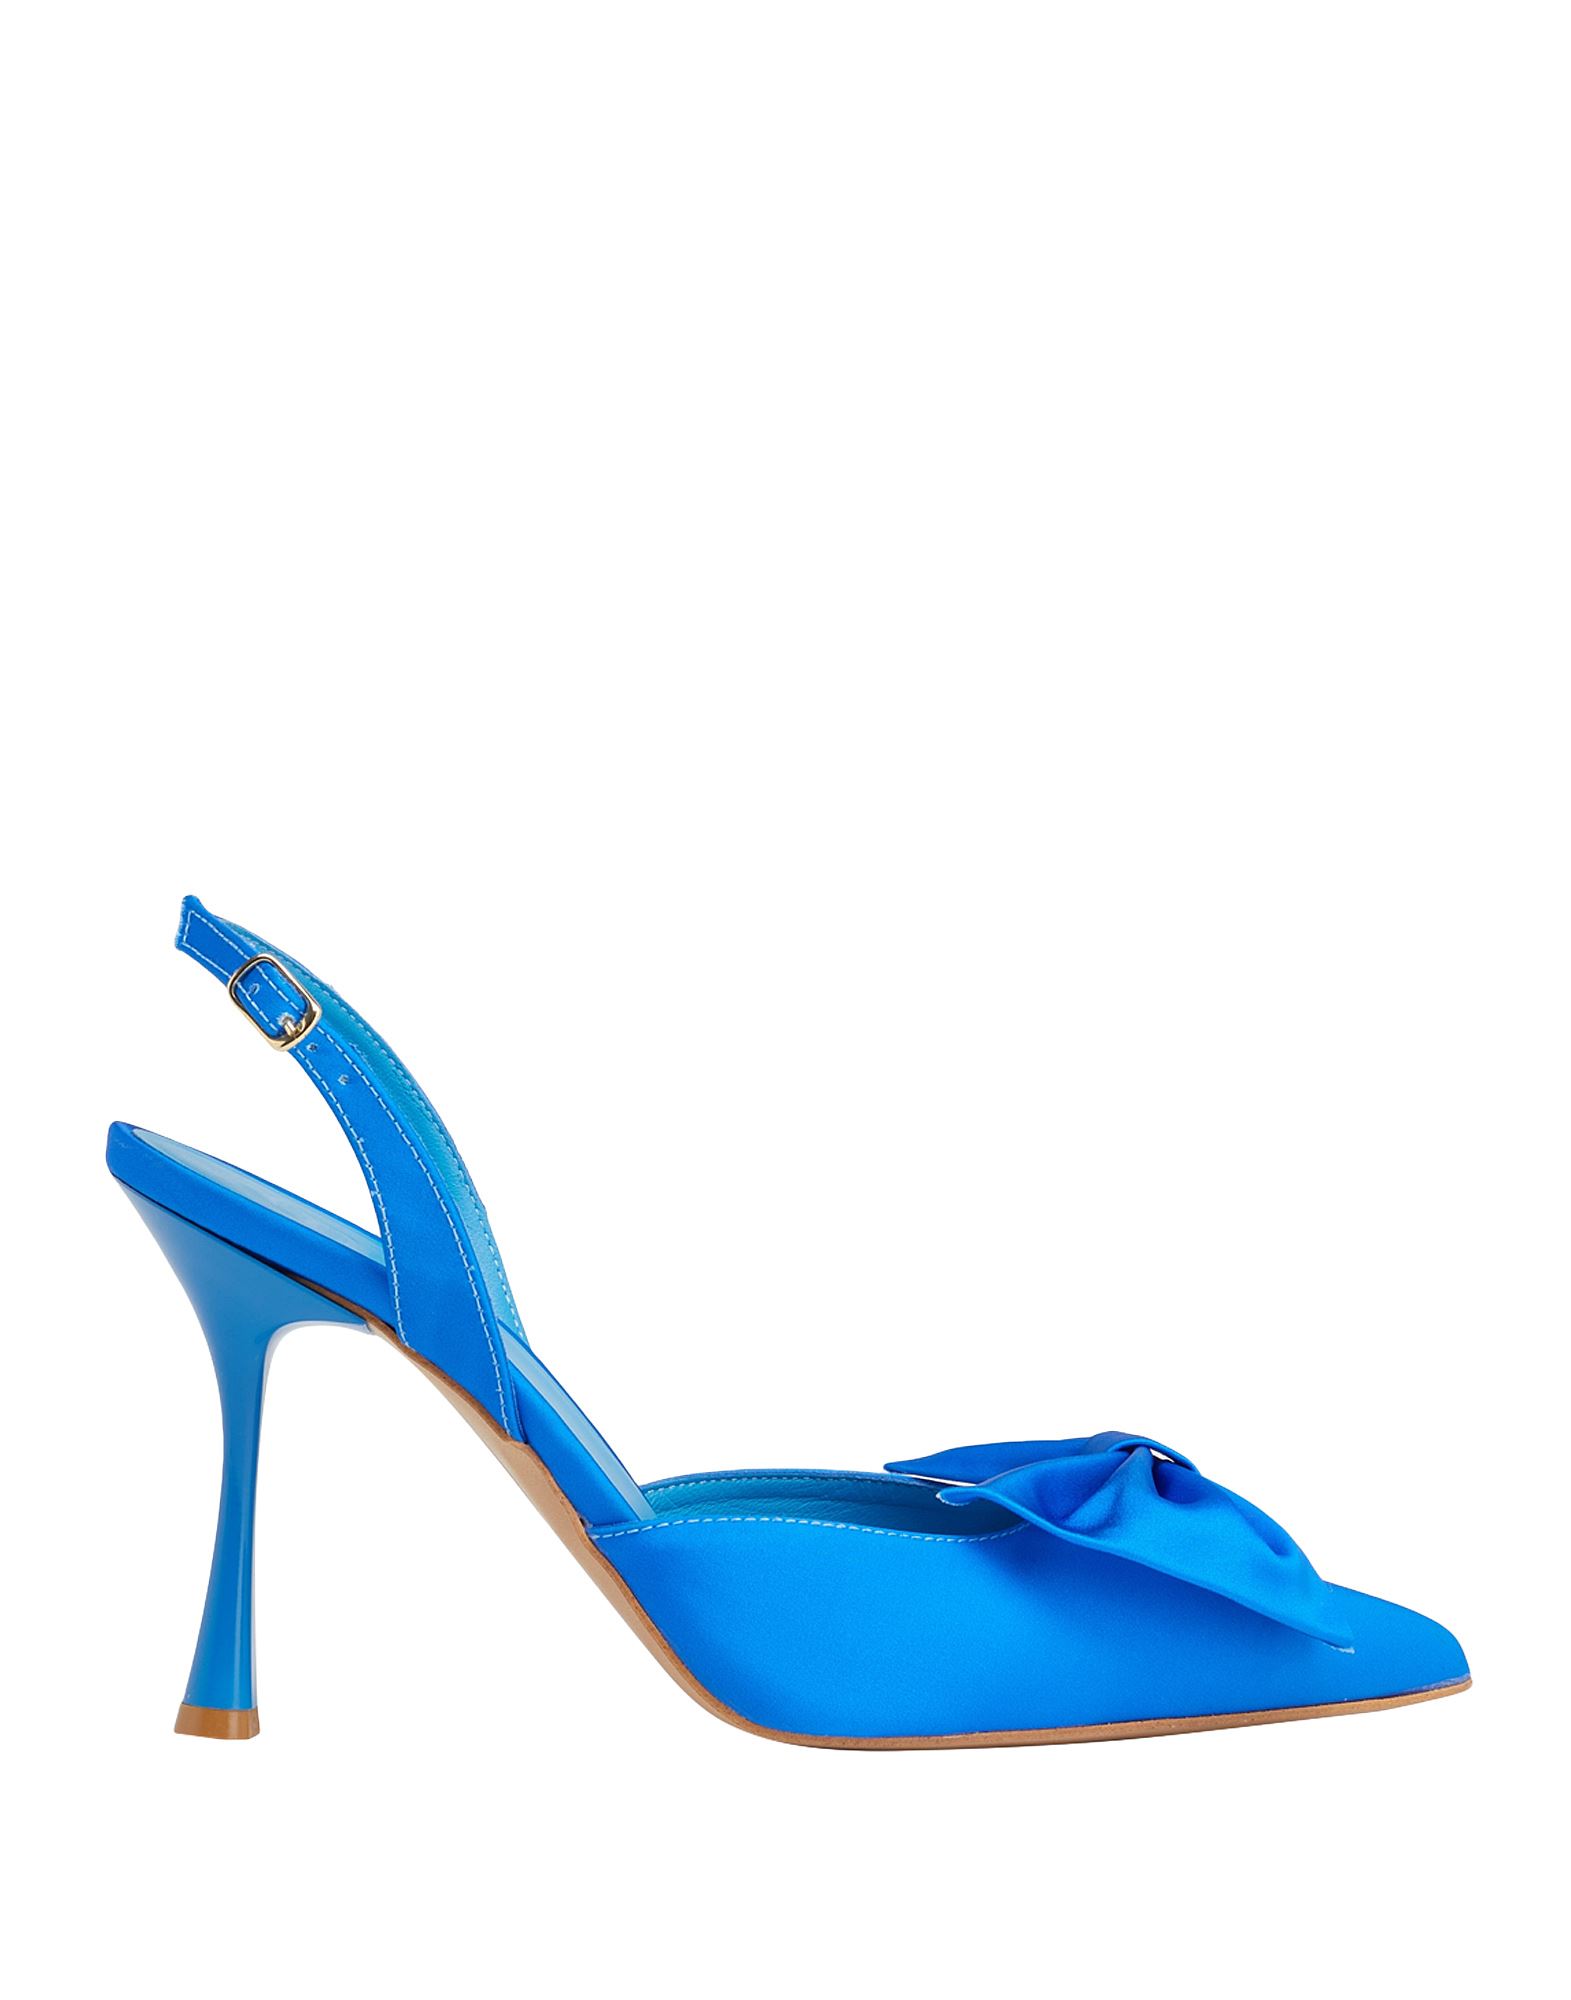 8 By Yoox Pumps In Blue